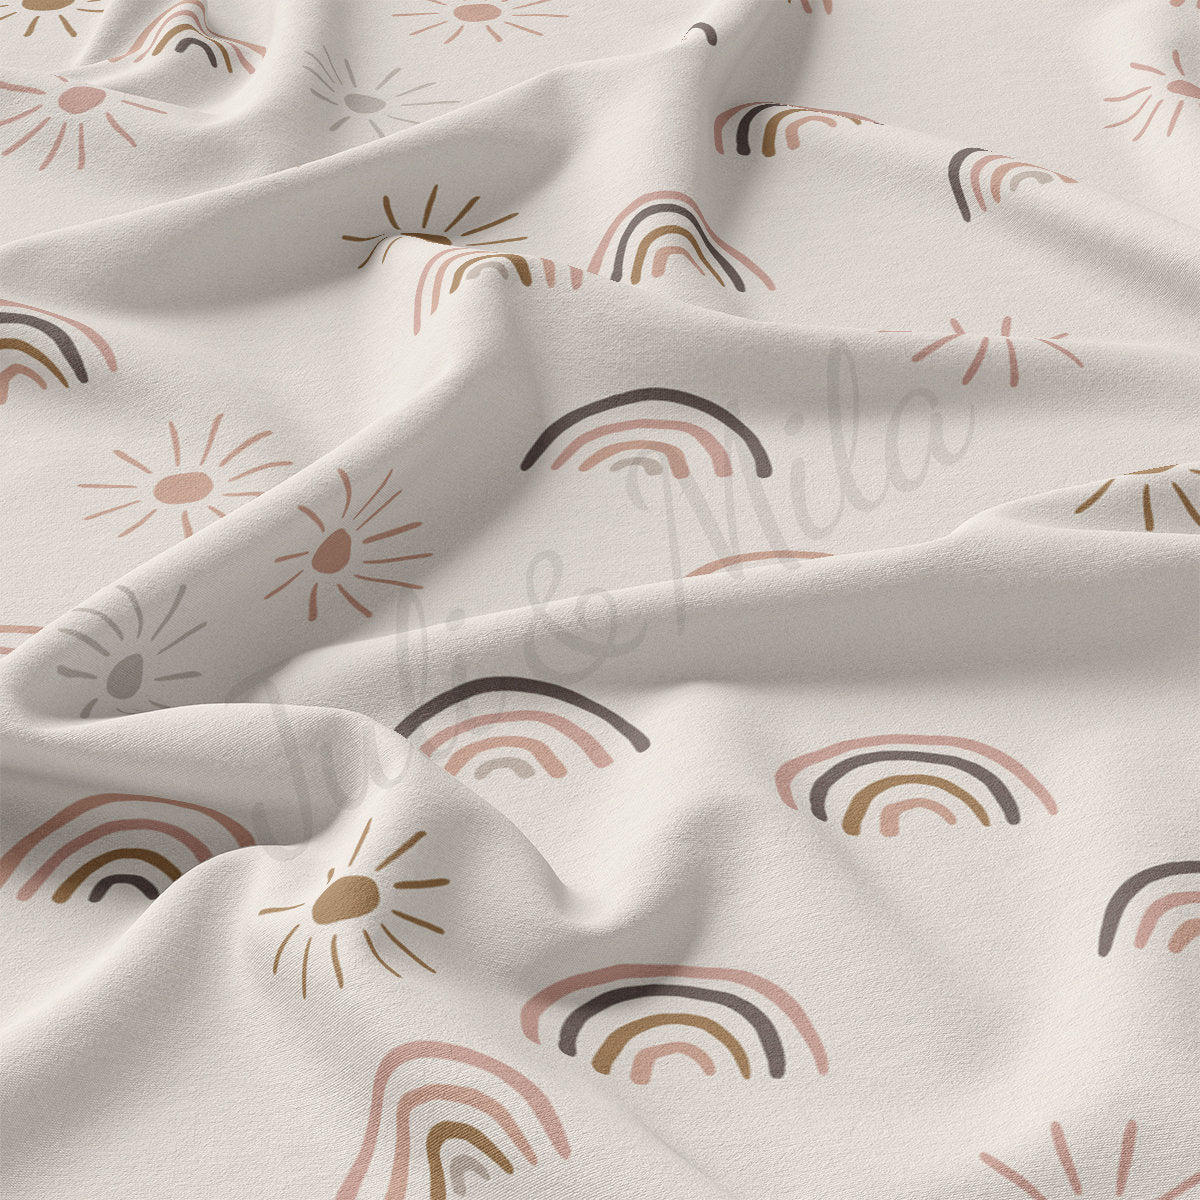 DBP Fabric Double Brushed Polyester DBP2422 Rainbow